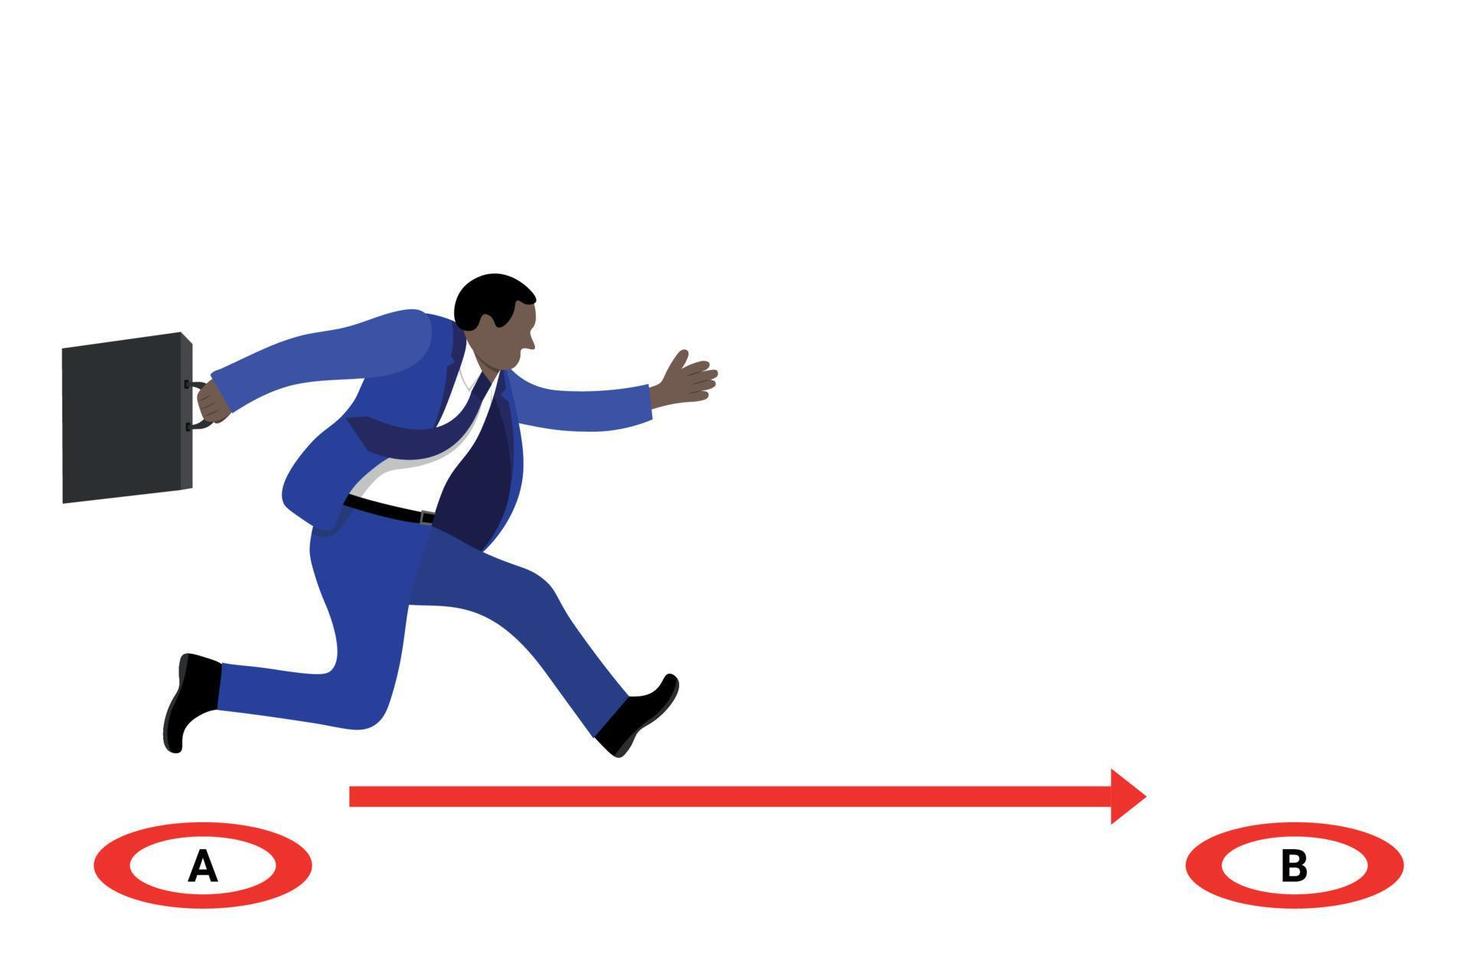 A black man in a blue business suit with a briefcase runs from point A to point B, isolate on white, flat vector